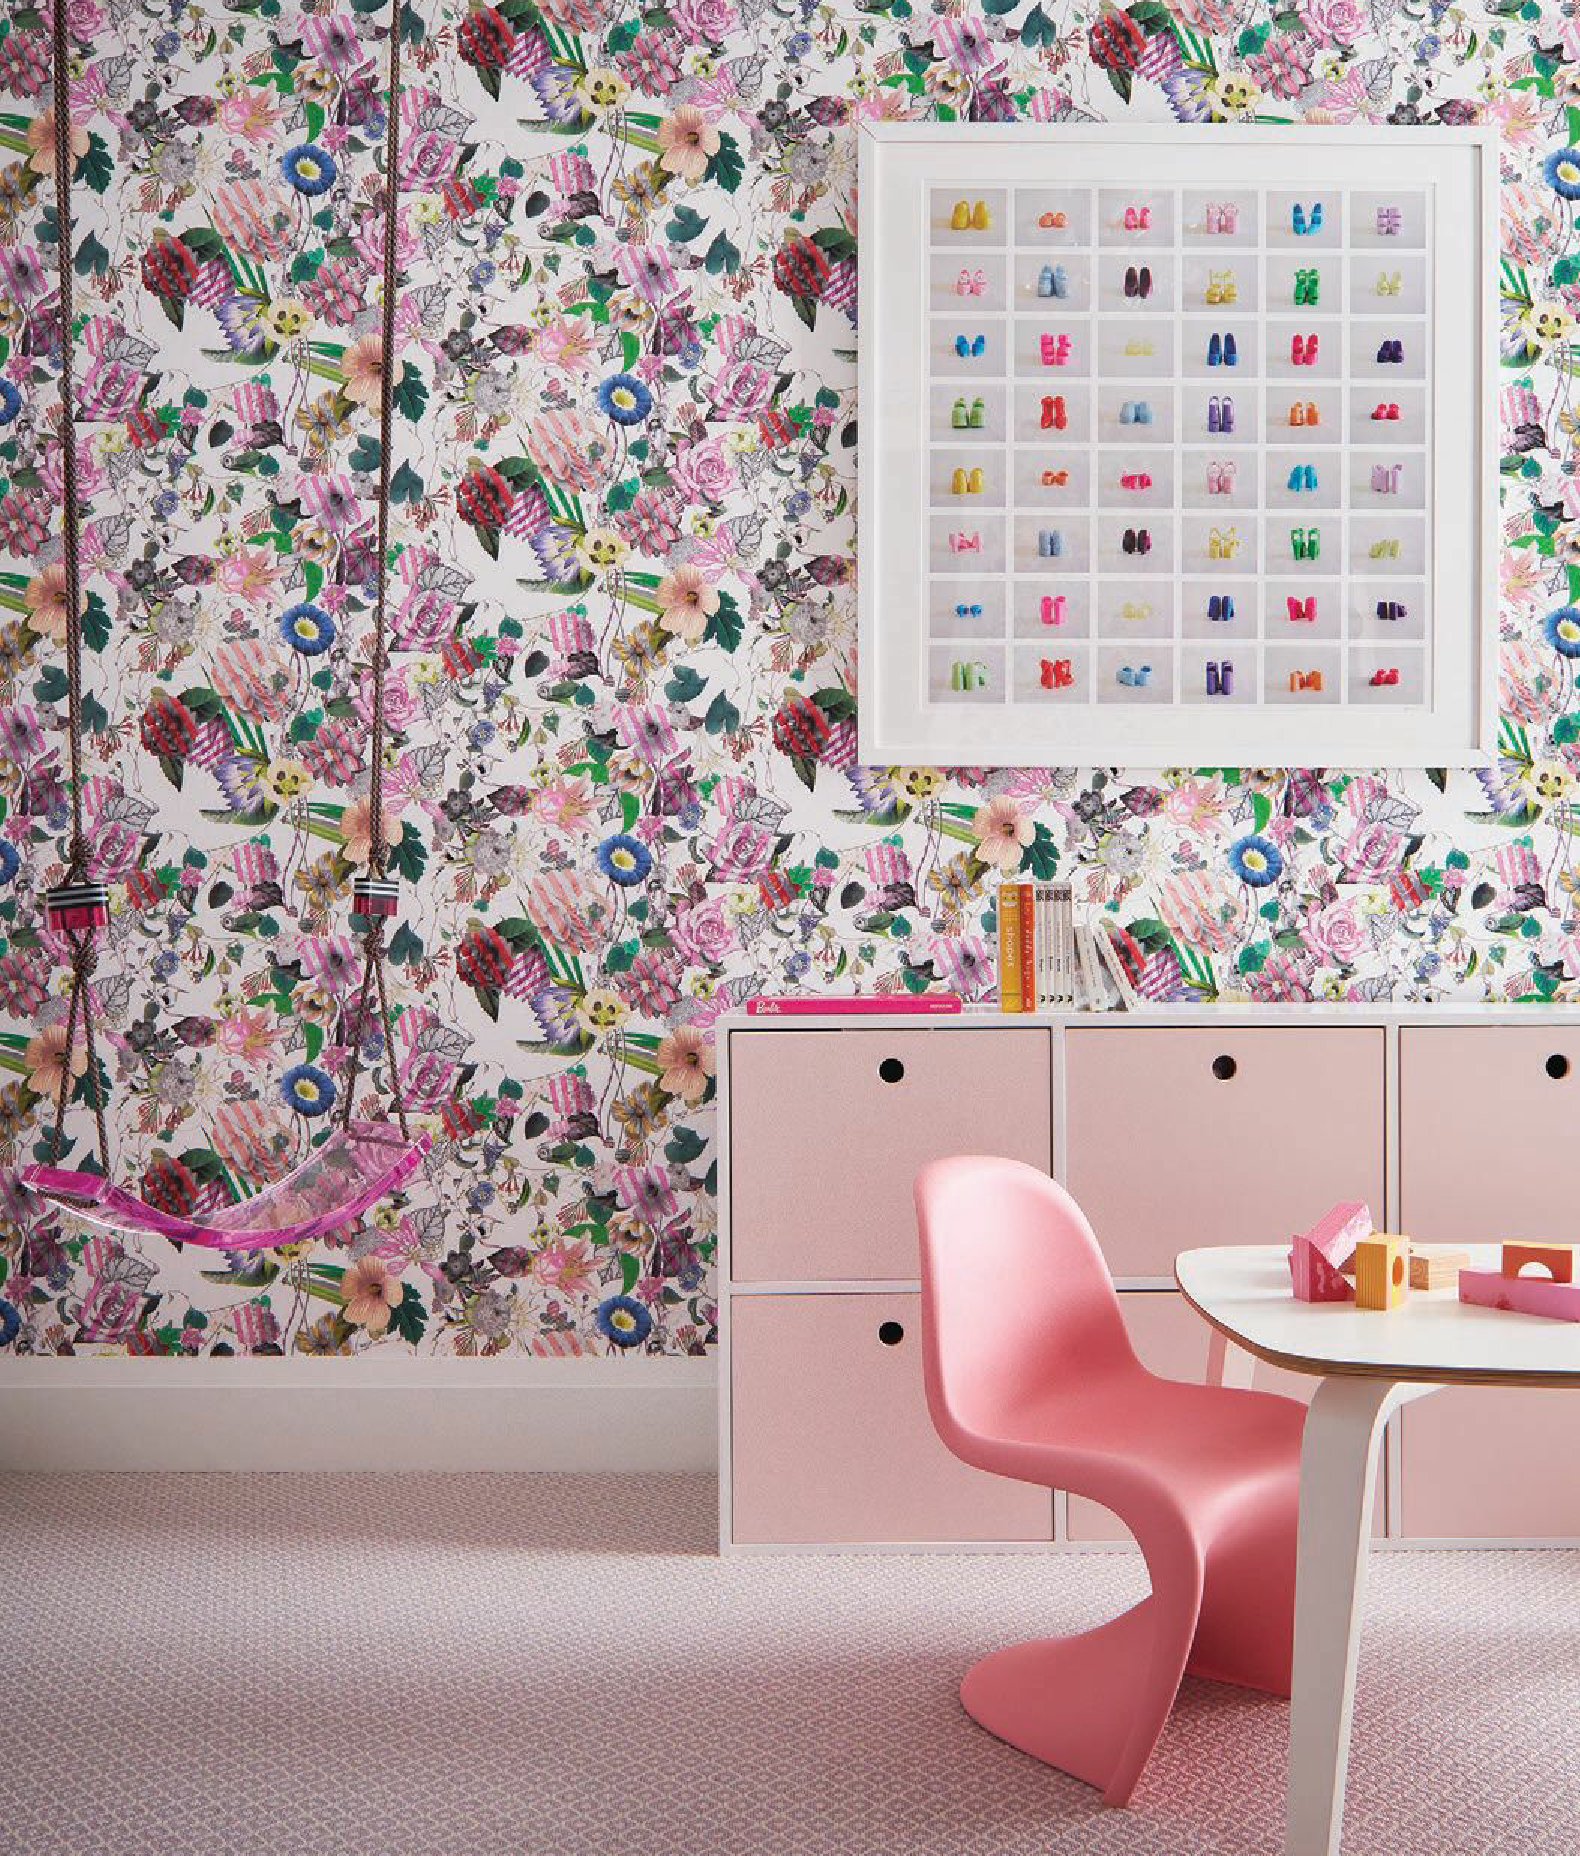 The girls’ playroom is bright and cheery with Designers Guild wallpaper and all-pink
accessories PHOTOGRAPHED BY RYAN MCDONALD